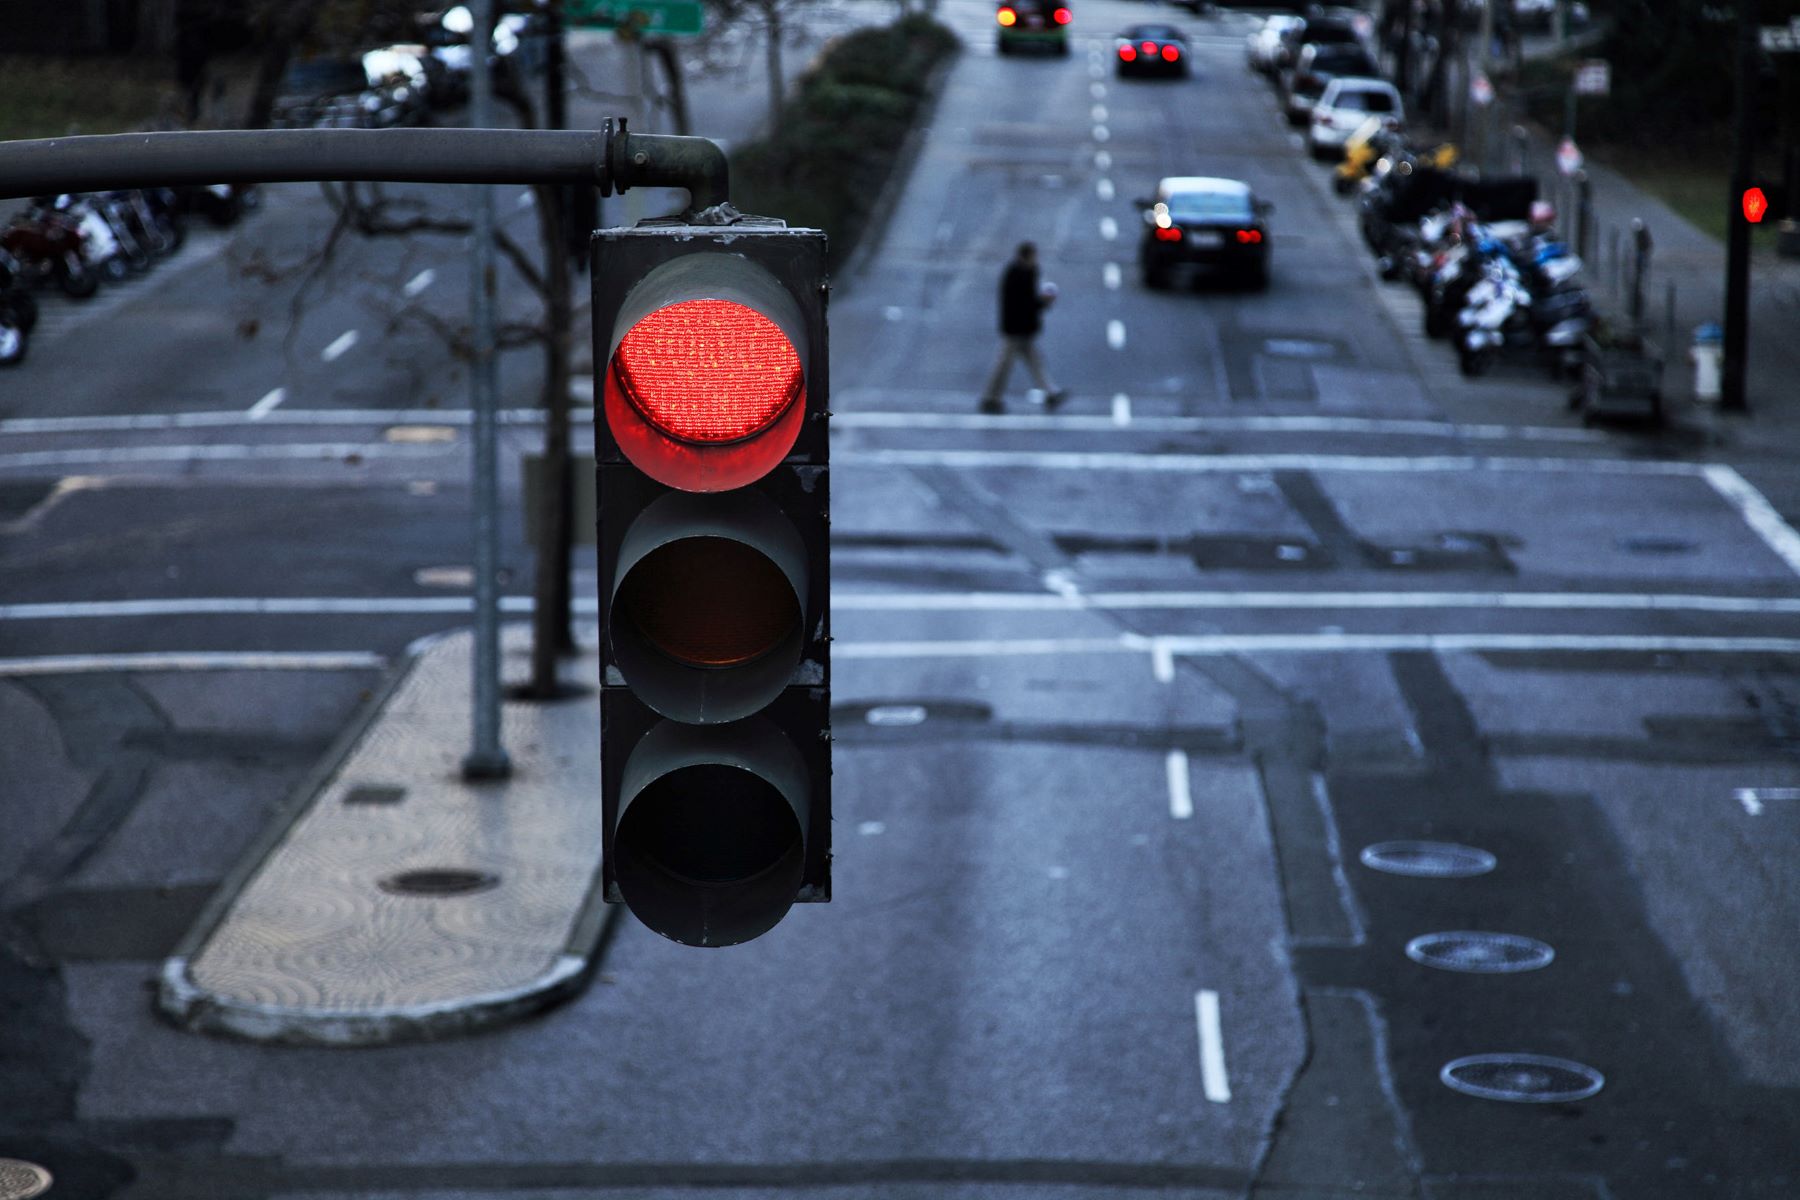 The Surprising Rule You Didn’t Know About Making Right Turns On Red